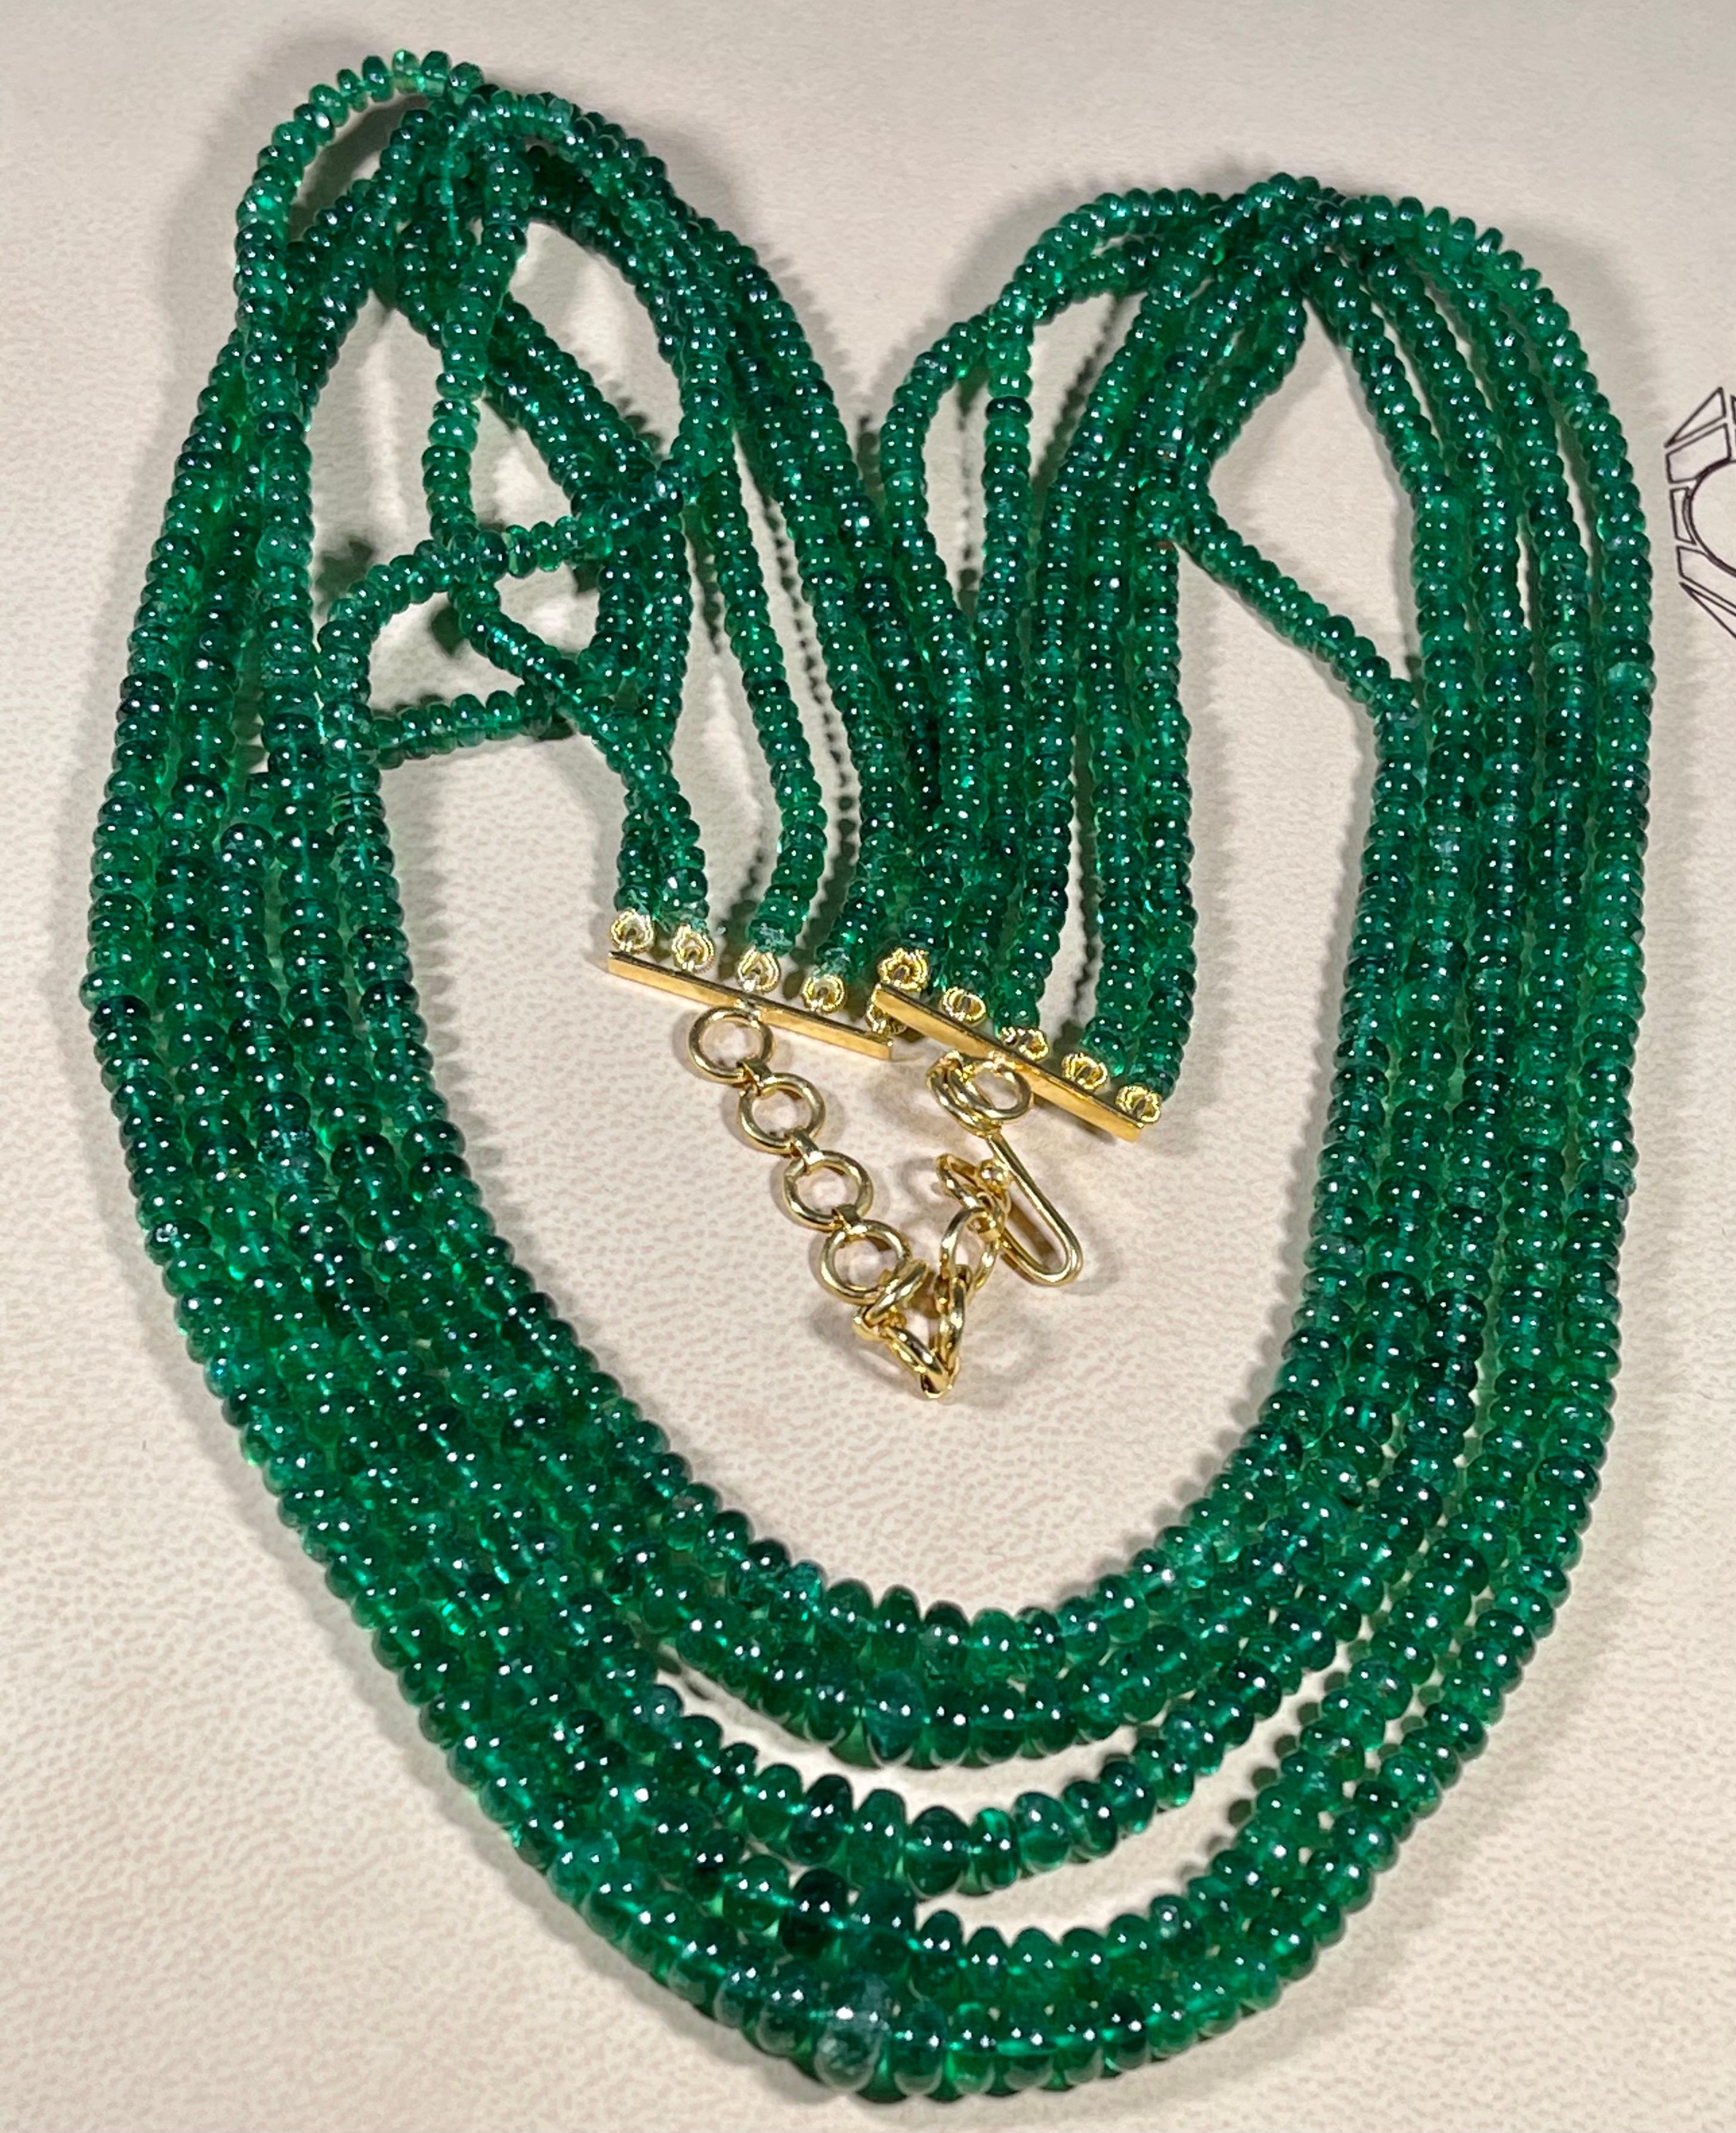 300ct Fine Emerald Beads 5 Line Necklace with 14 kt Yellow Gold Clasp Adjustable For Sale 7